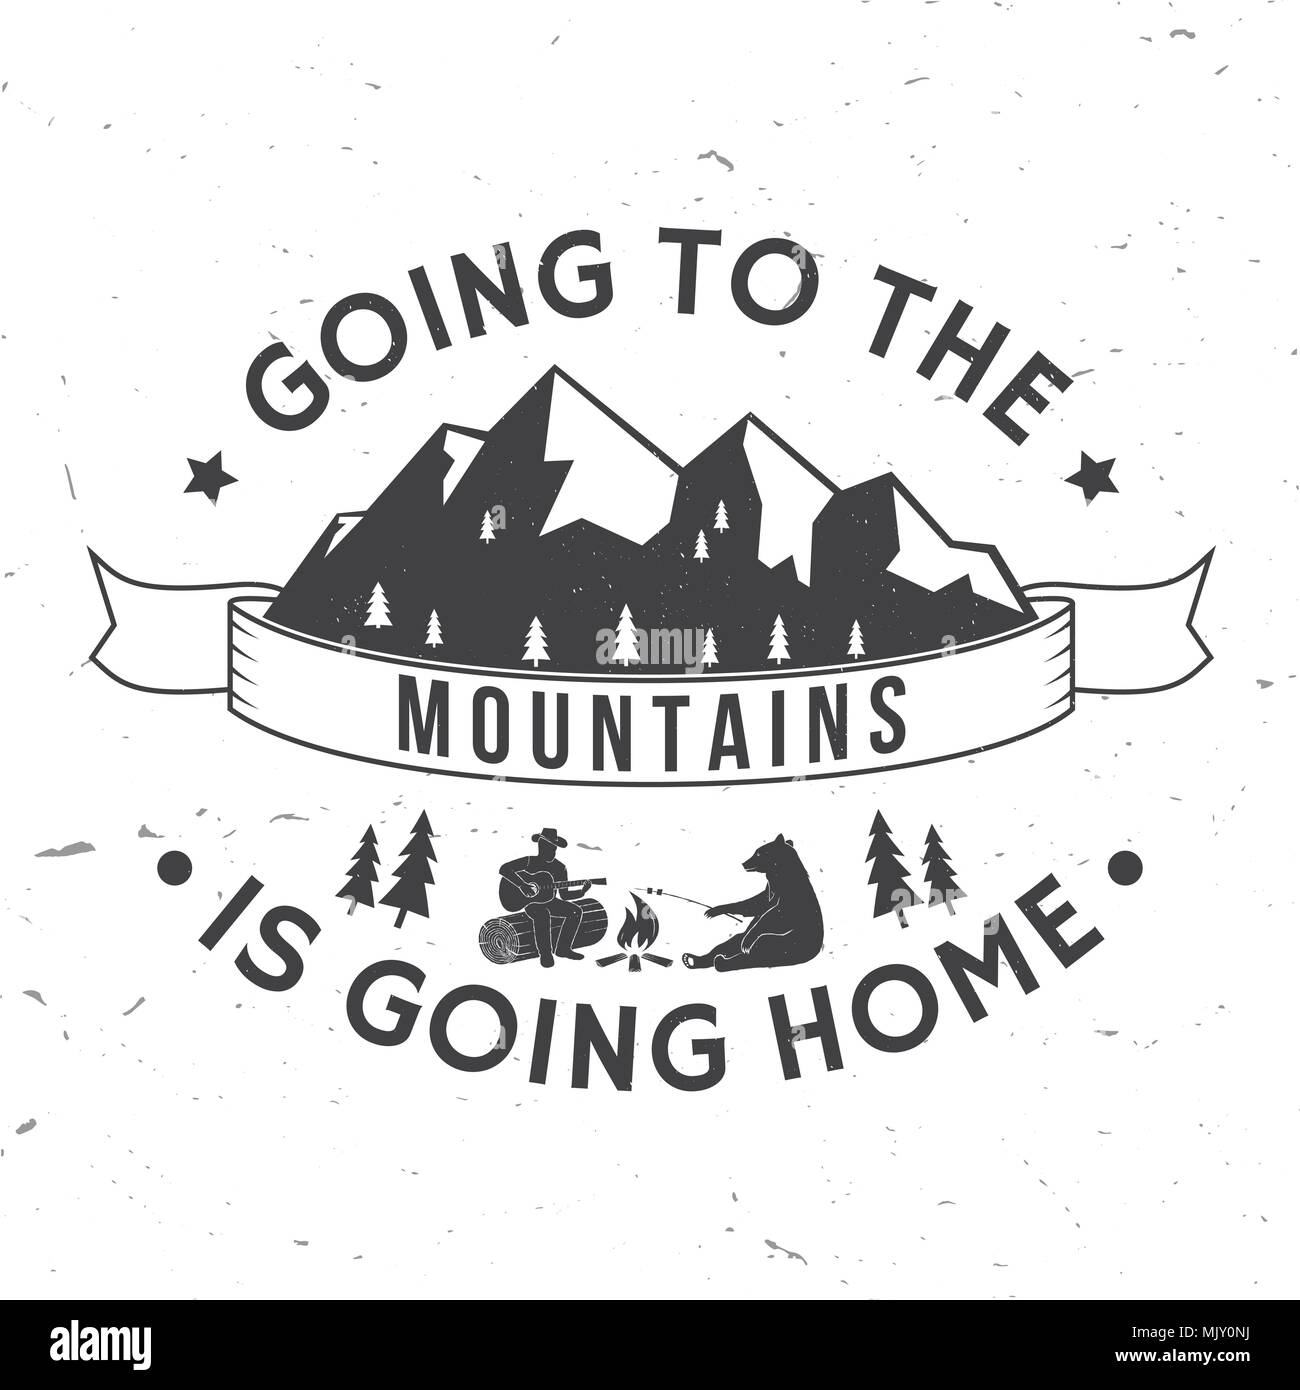 Going to the mountains is going home. Vector illustration. Concept for shirt or logo, print, stamp or tee. Stock Vector